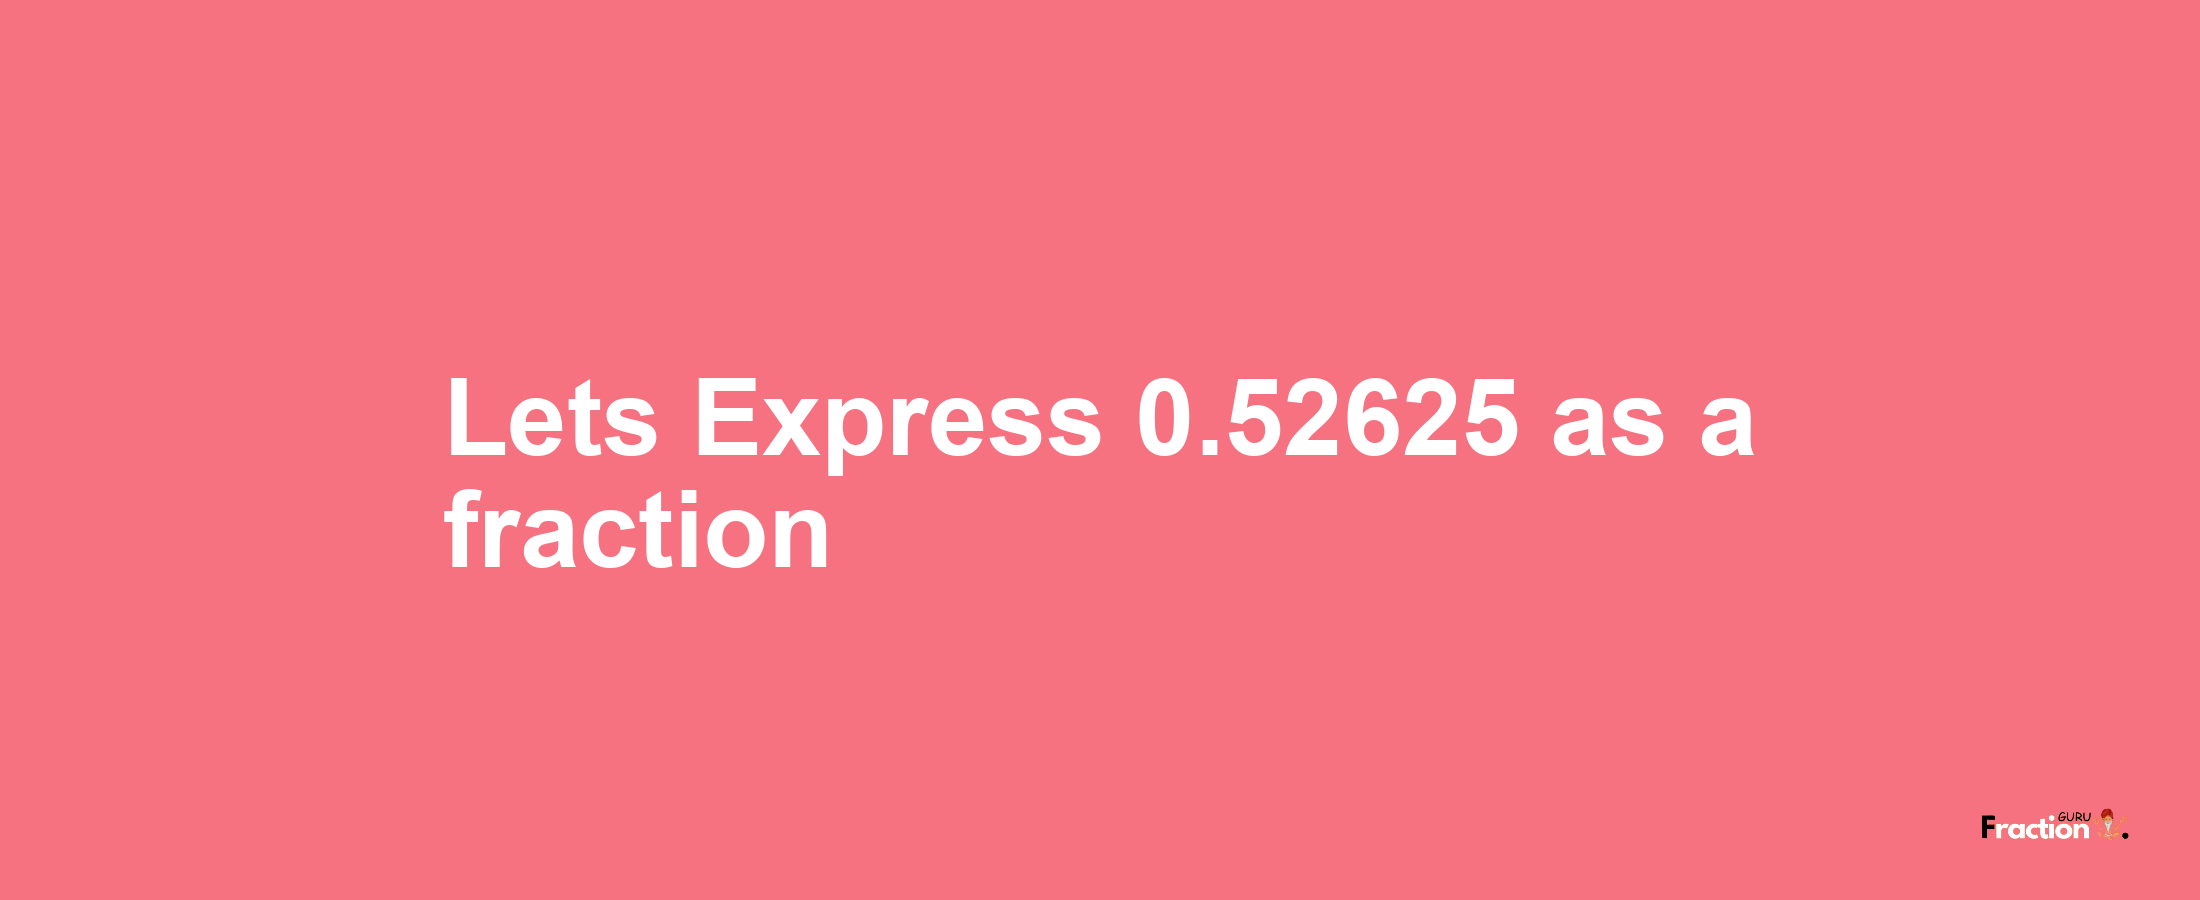 Lets Express 0.52625 as afraction